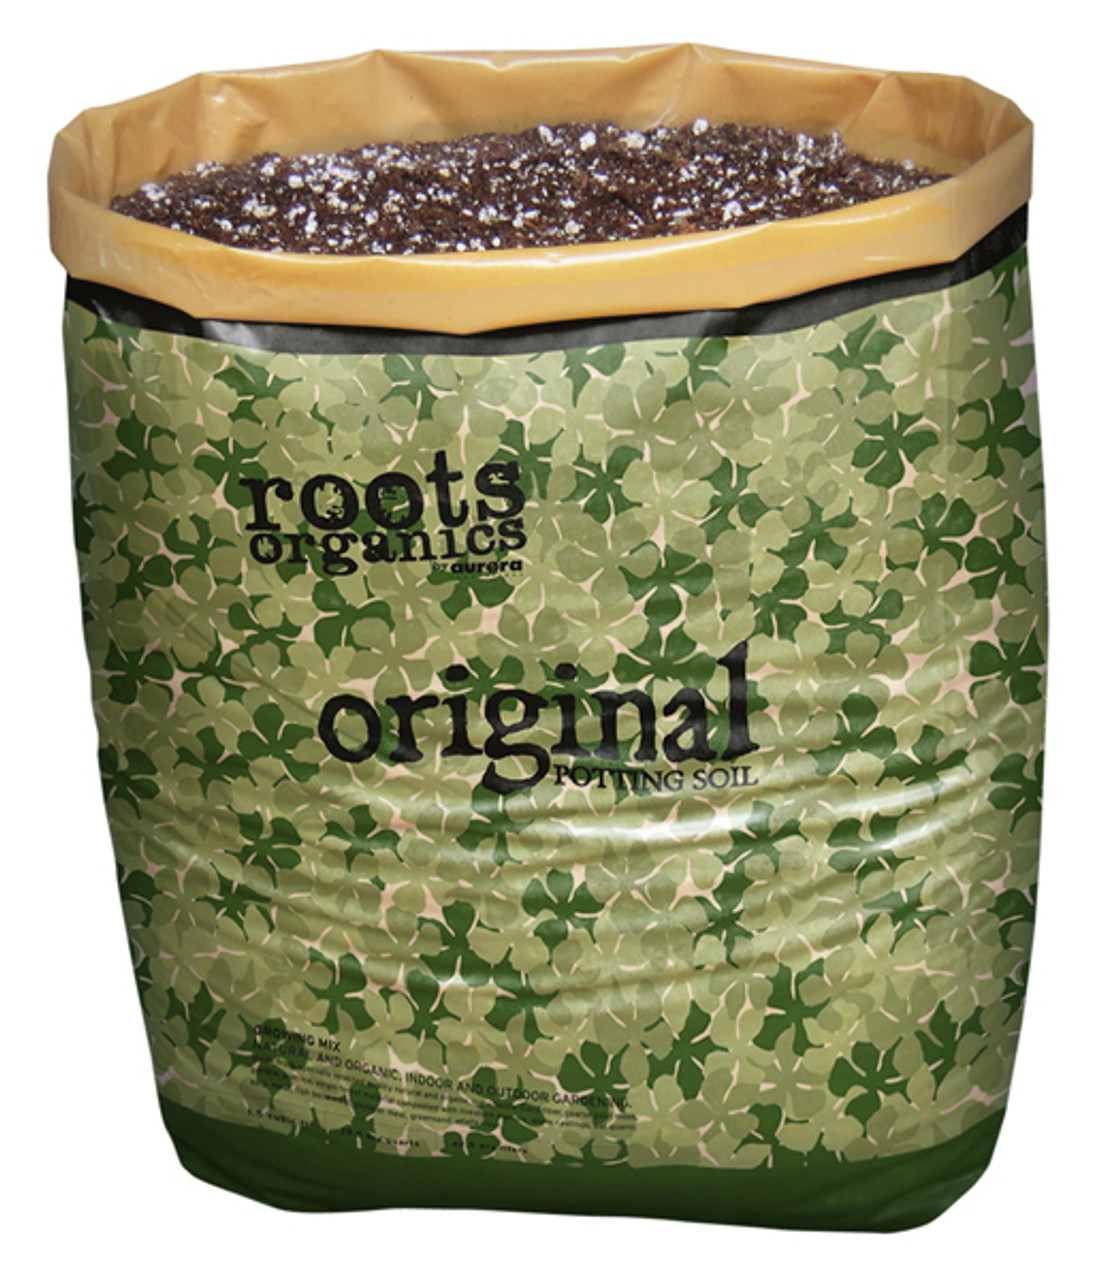 Roots Organics Original Potting Soil  1.5 cf *pick up in store only